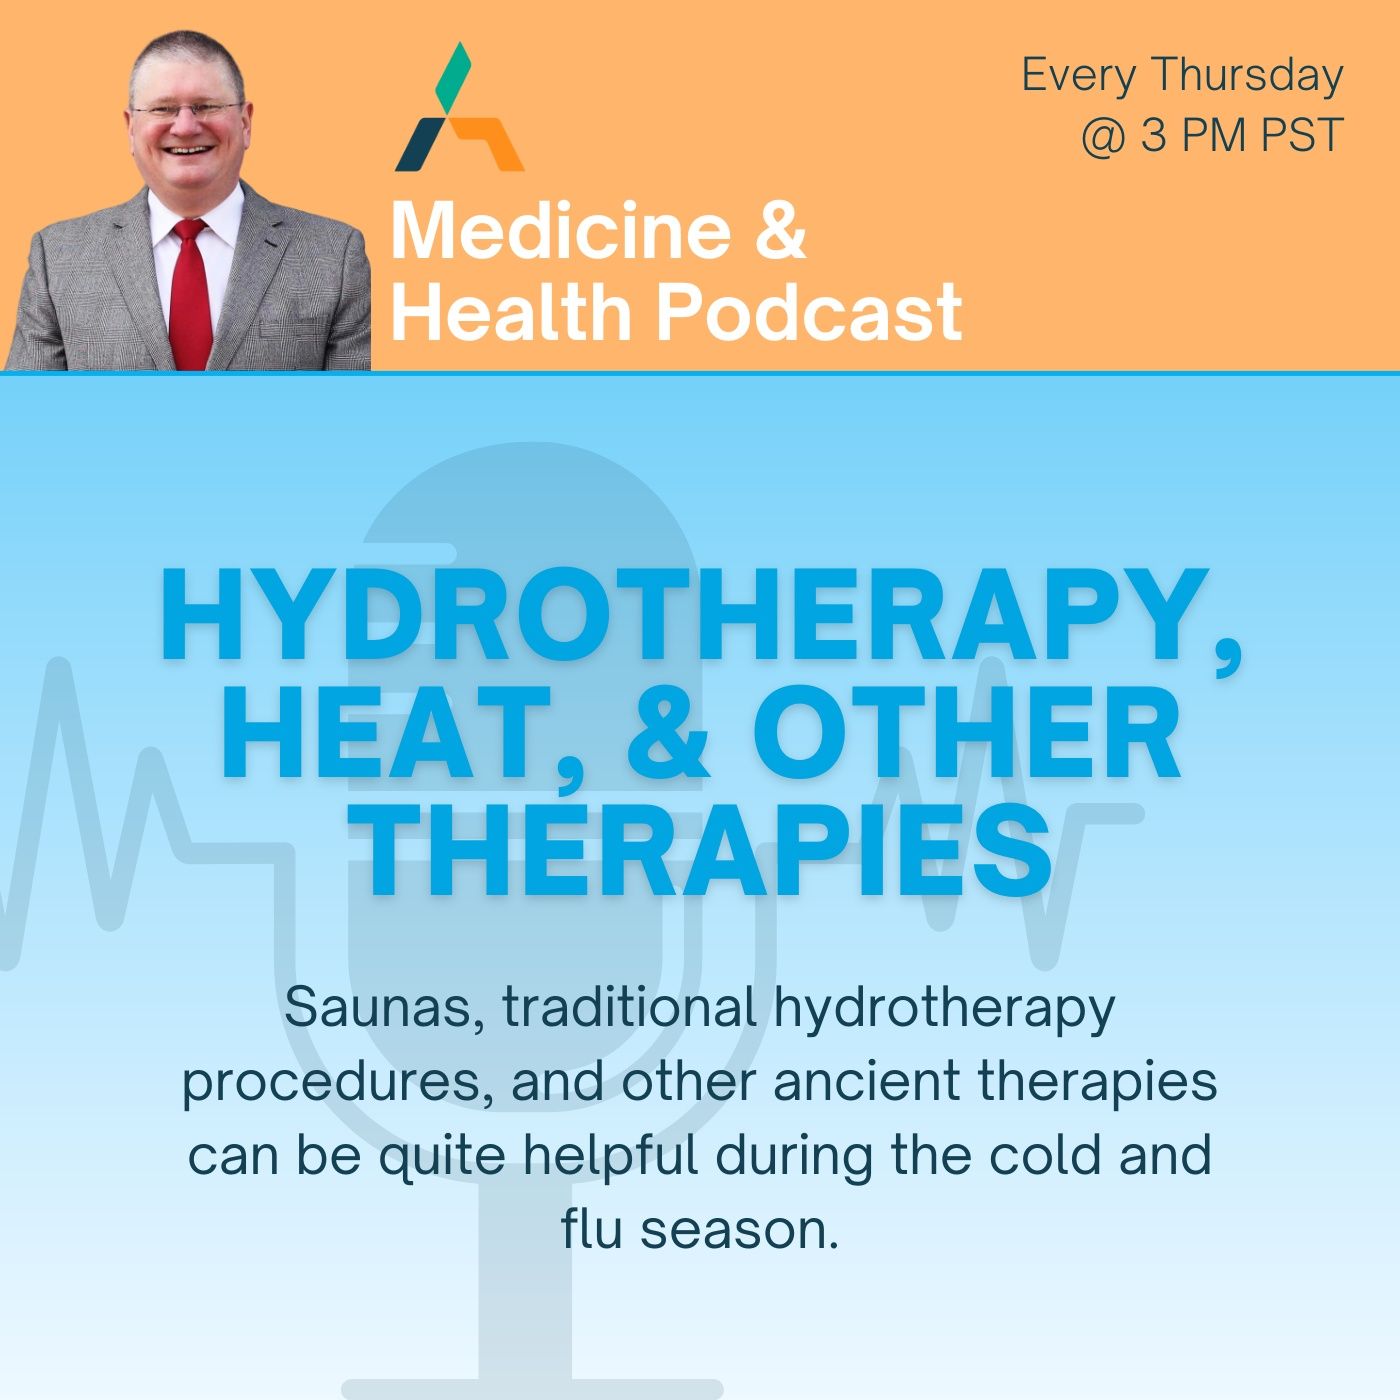 HYDROTHERAPY, HEAT, AND OTHER THERAPIES